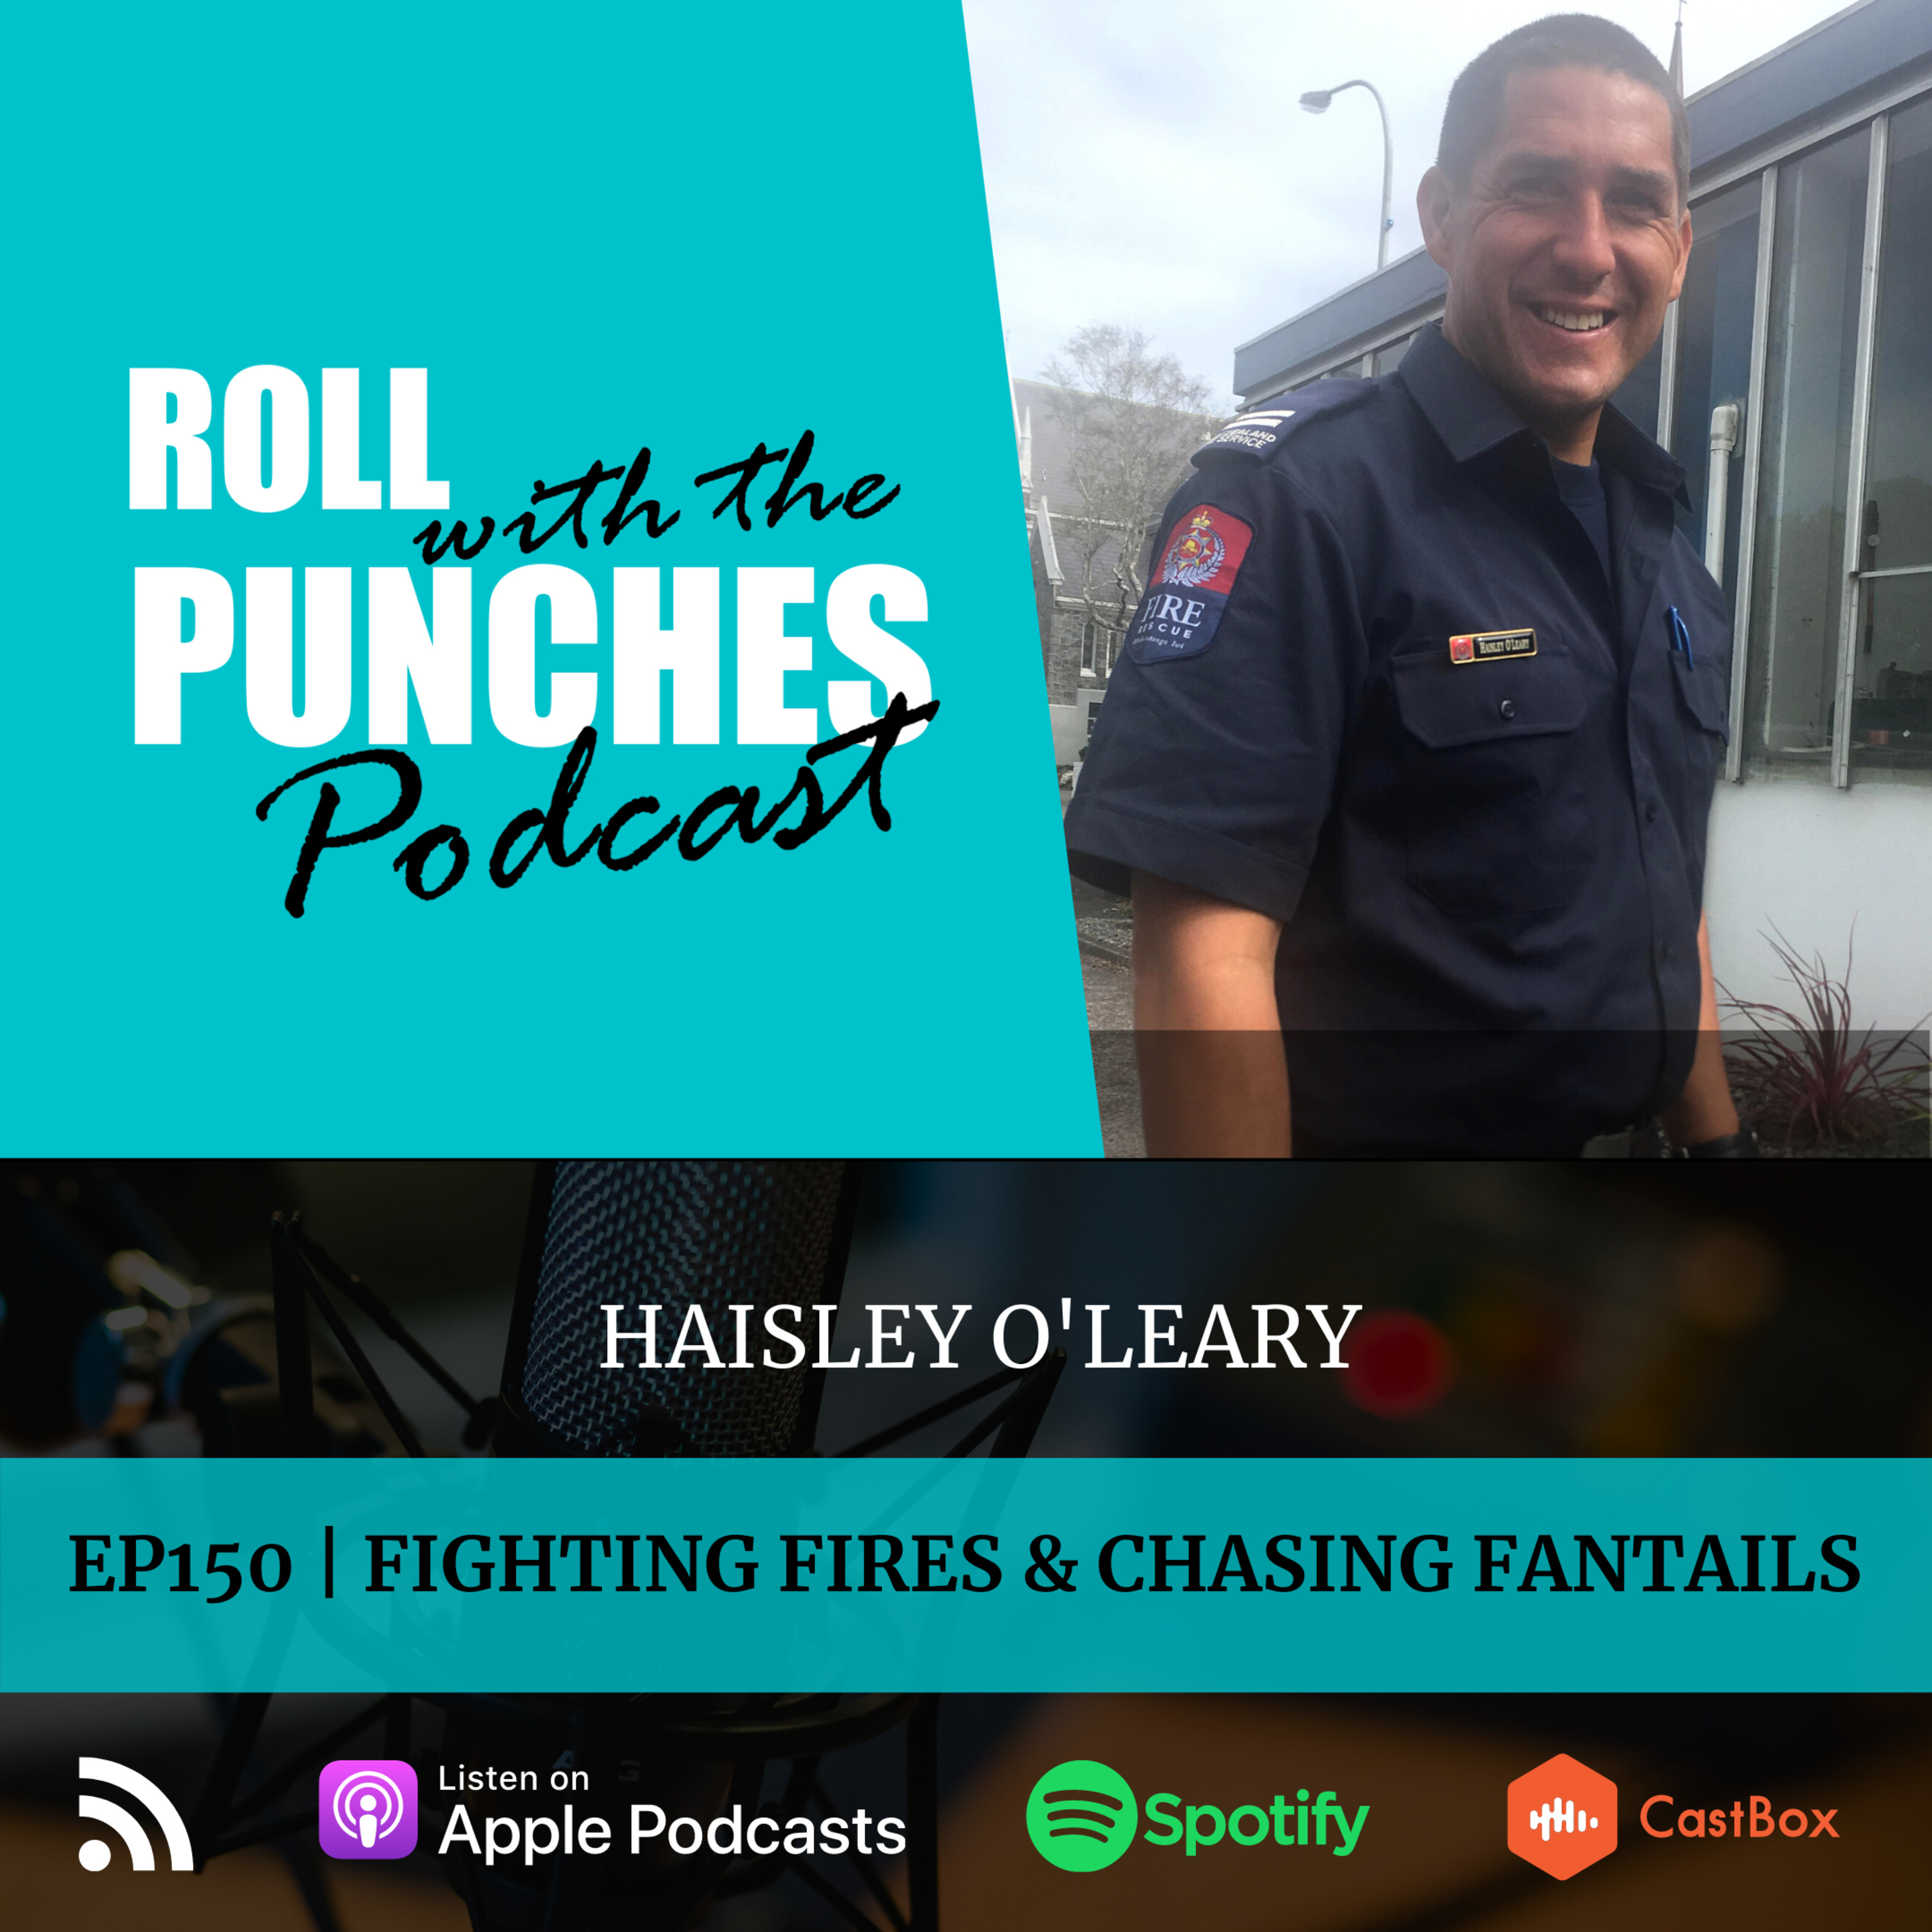 EP150 Fighting Fires & Chasing Fantails | Haisley O'Leary